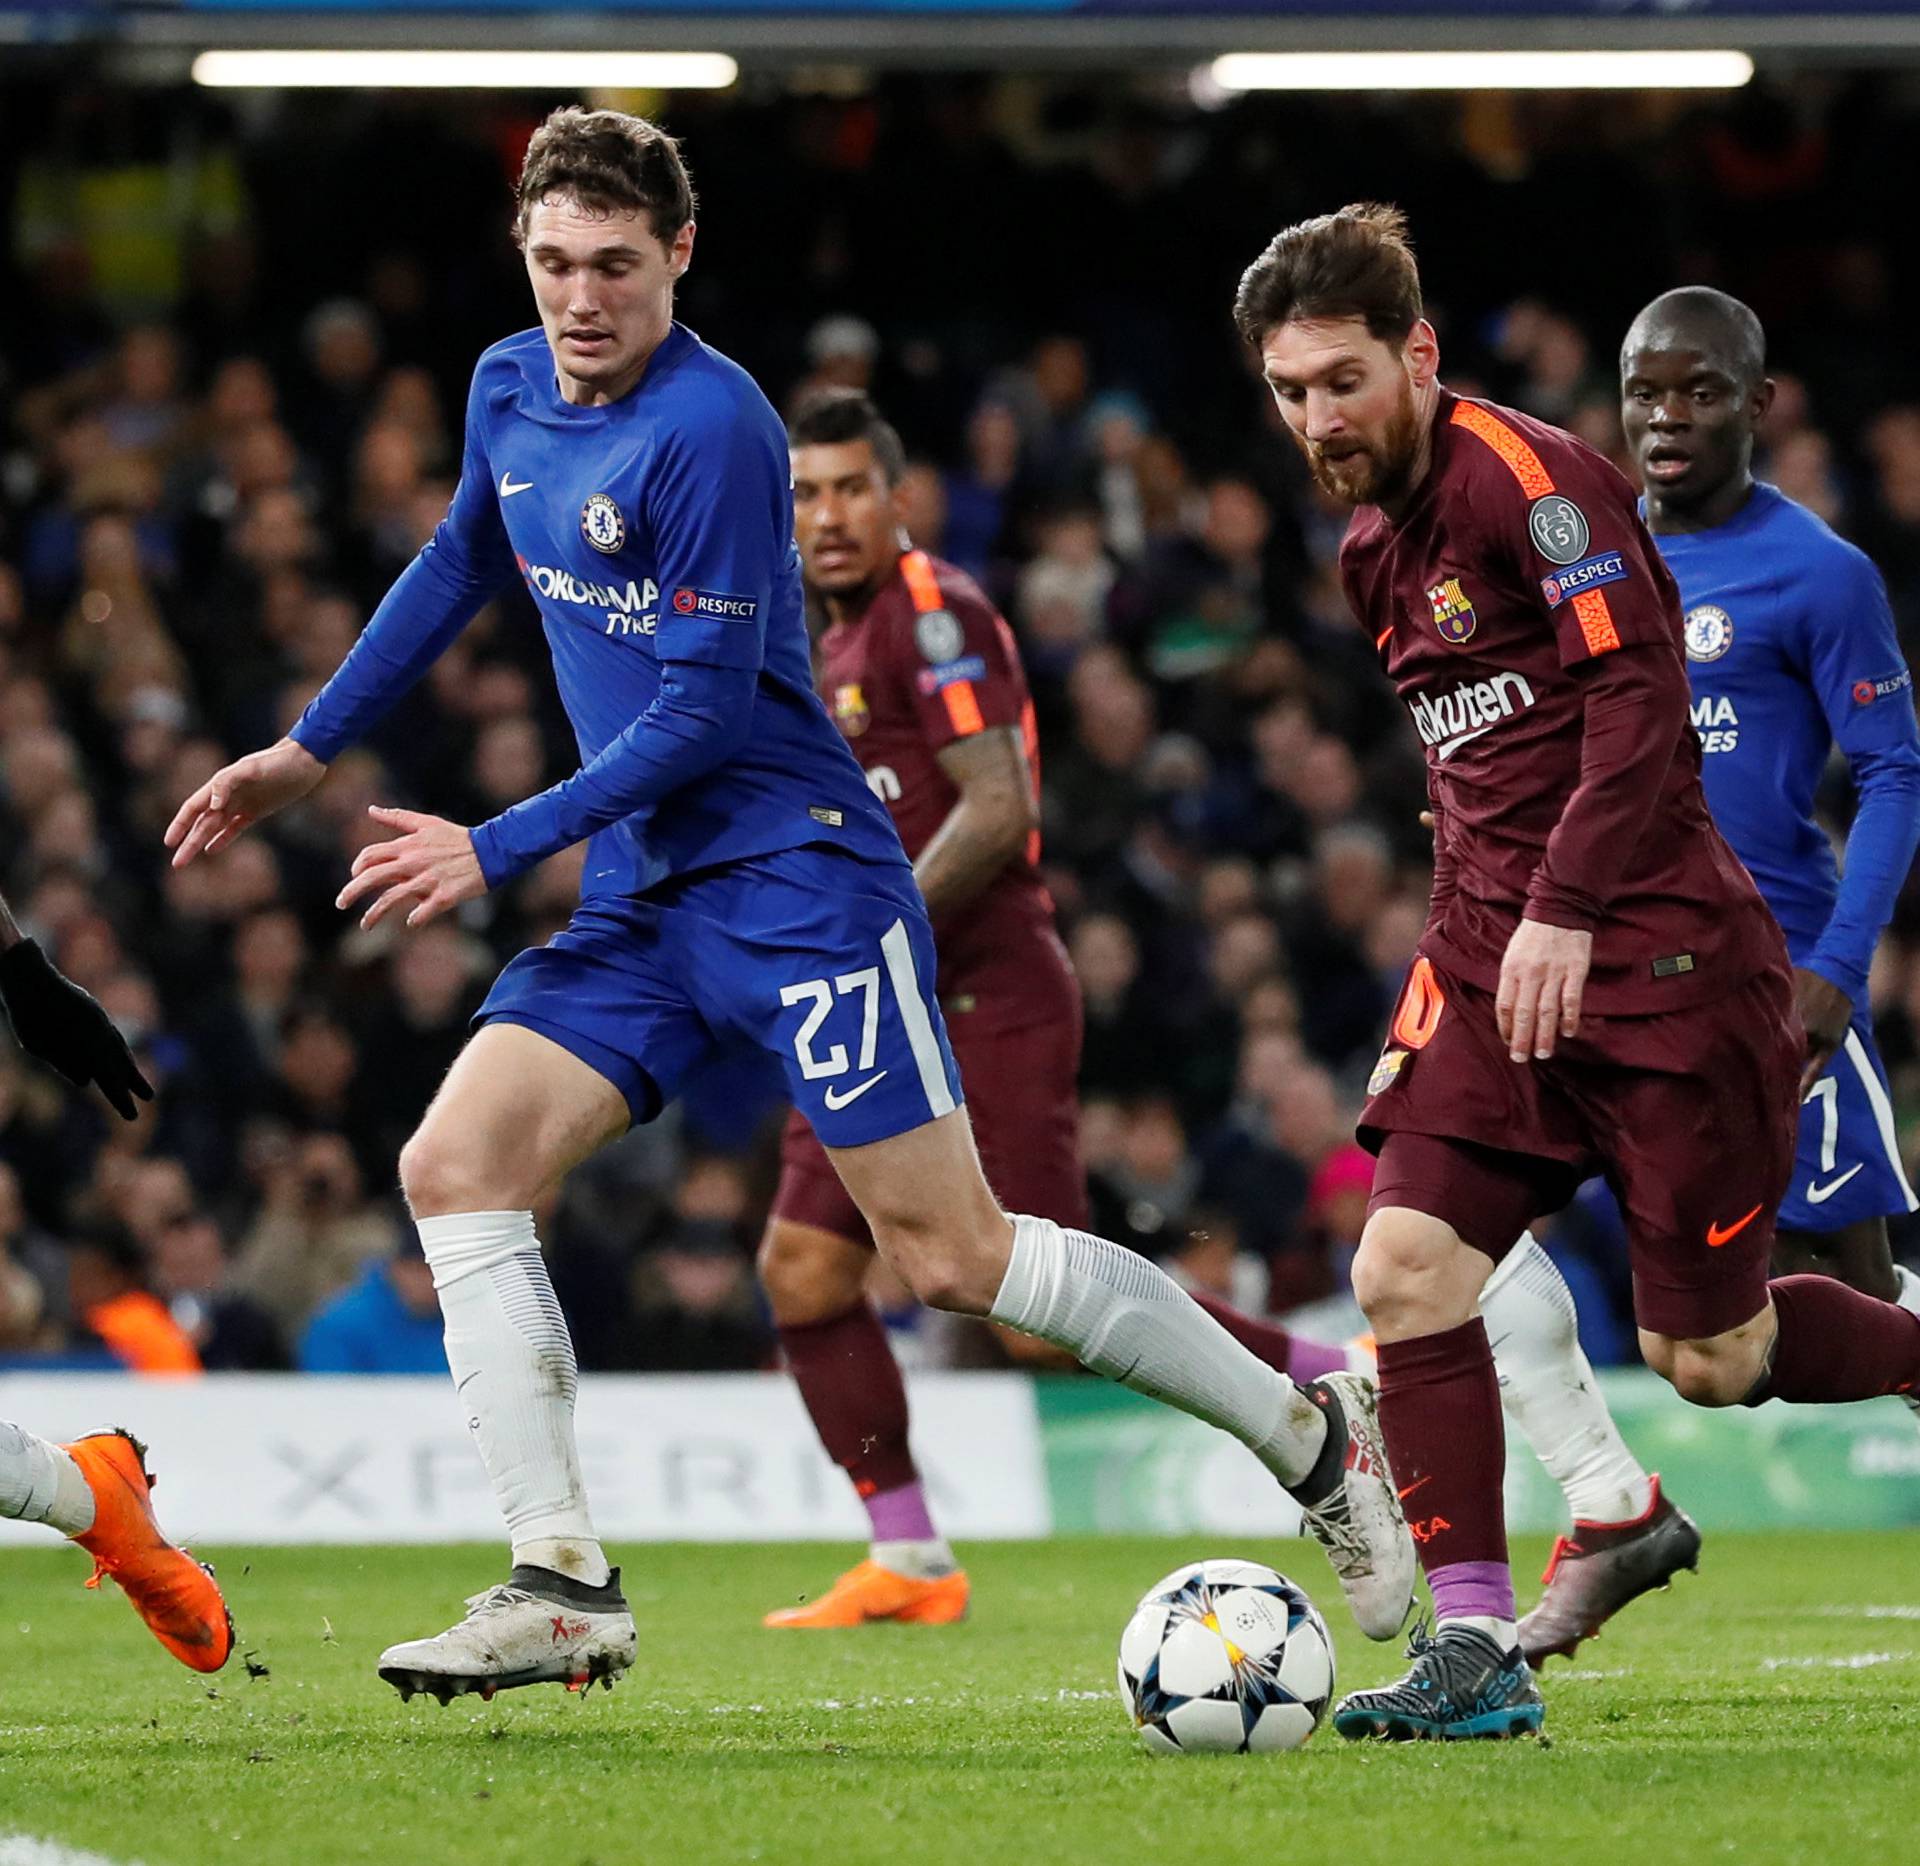 Champions League Round of 16 First Leg - Chelsea vs FC Barcelona